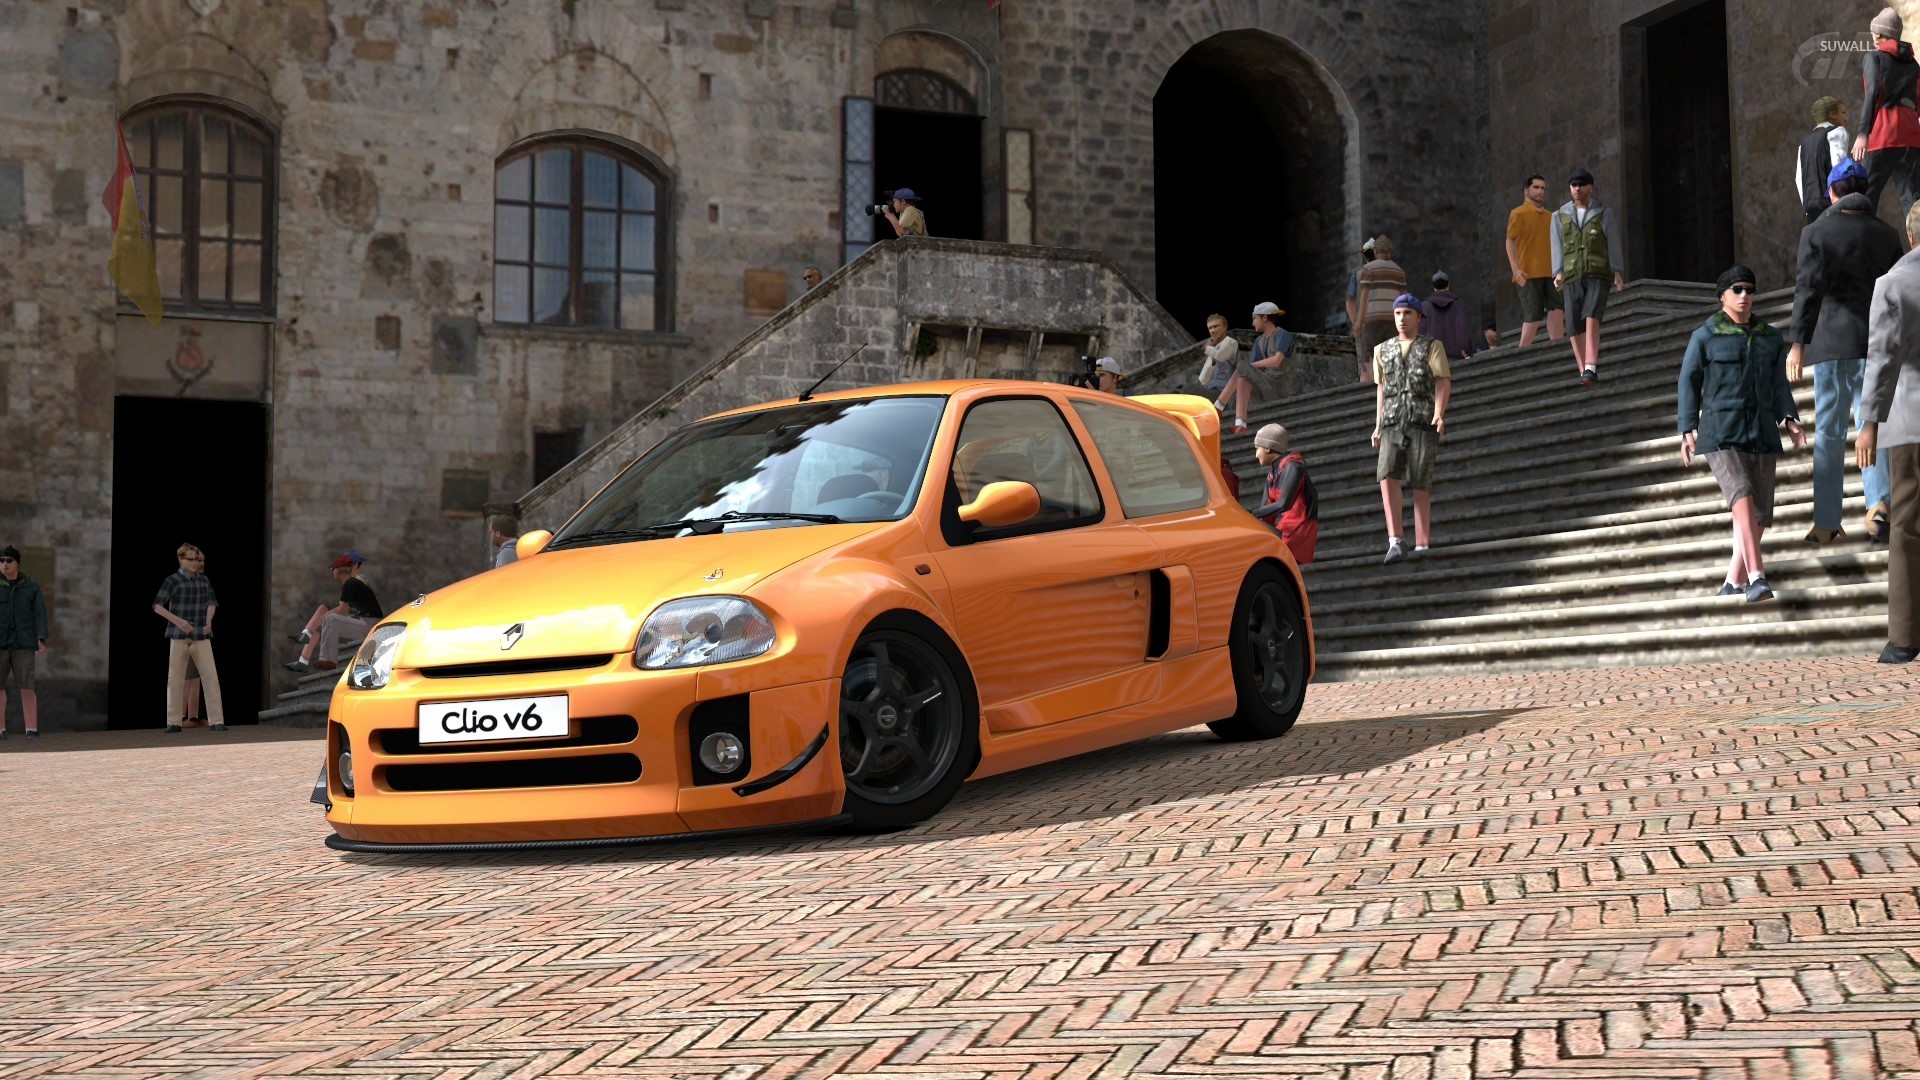 Clio V6 Renault Sport In Gran Turismo Wallpaper Game Wallpapers